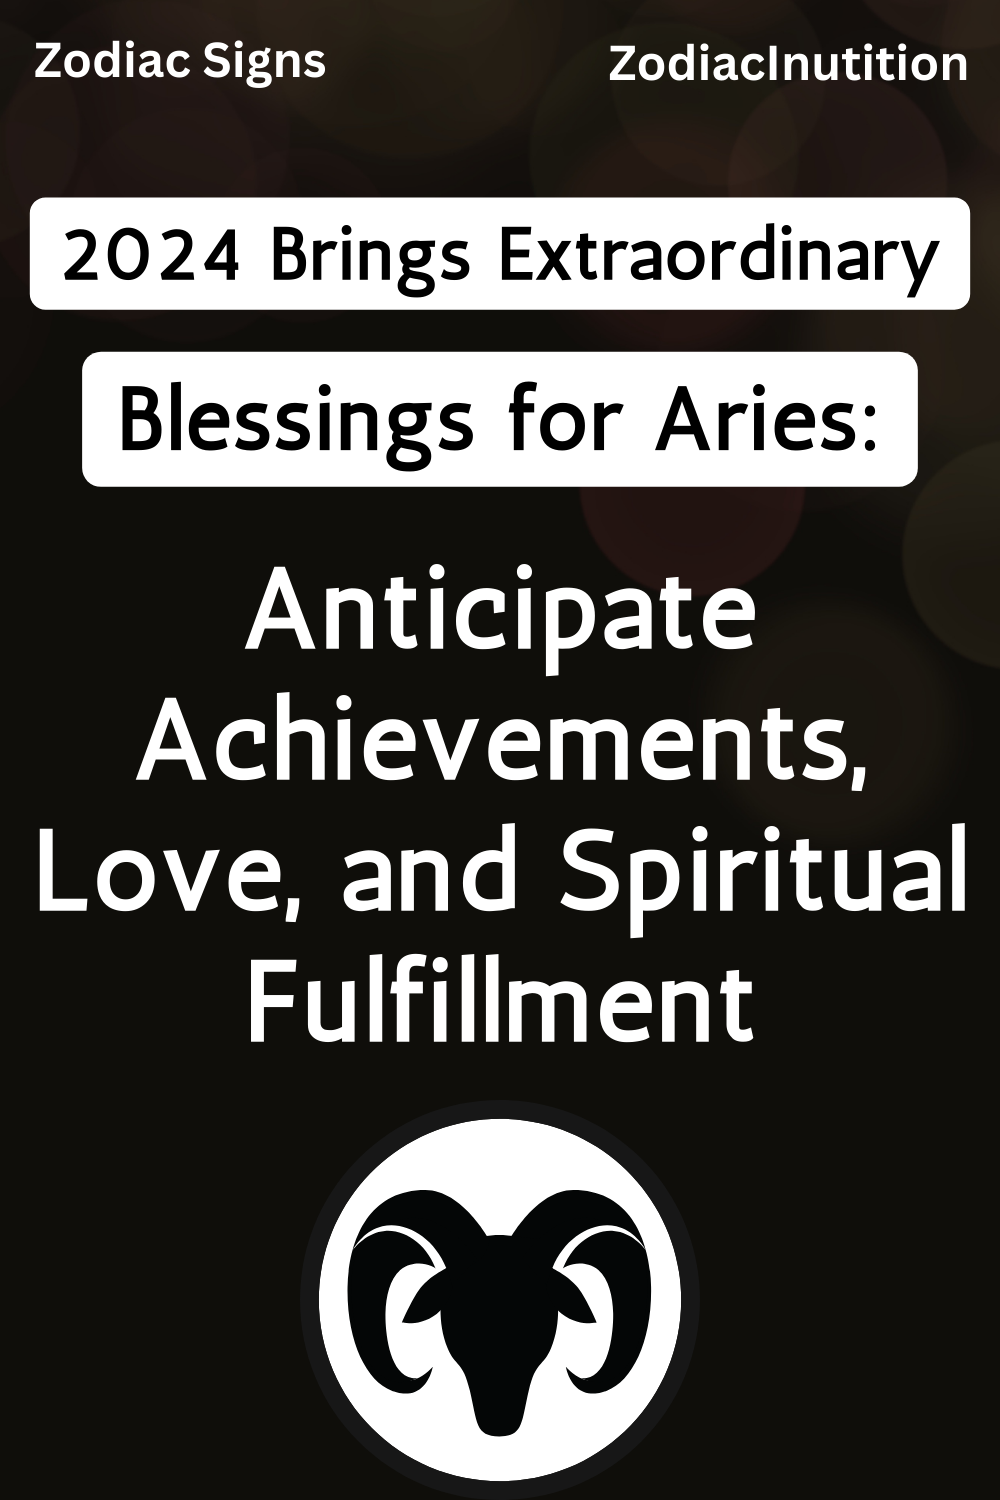 2024 Brings Extraordinary Blessings for Aries: Anticipate Achievements, Love, and Spiritual Fulfillment